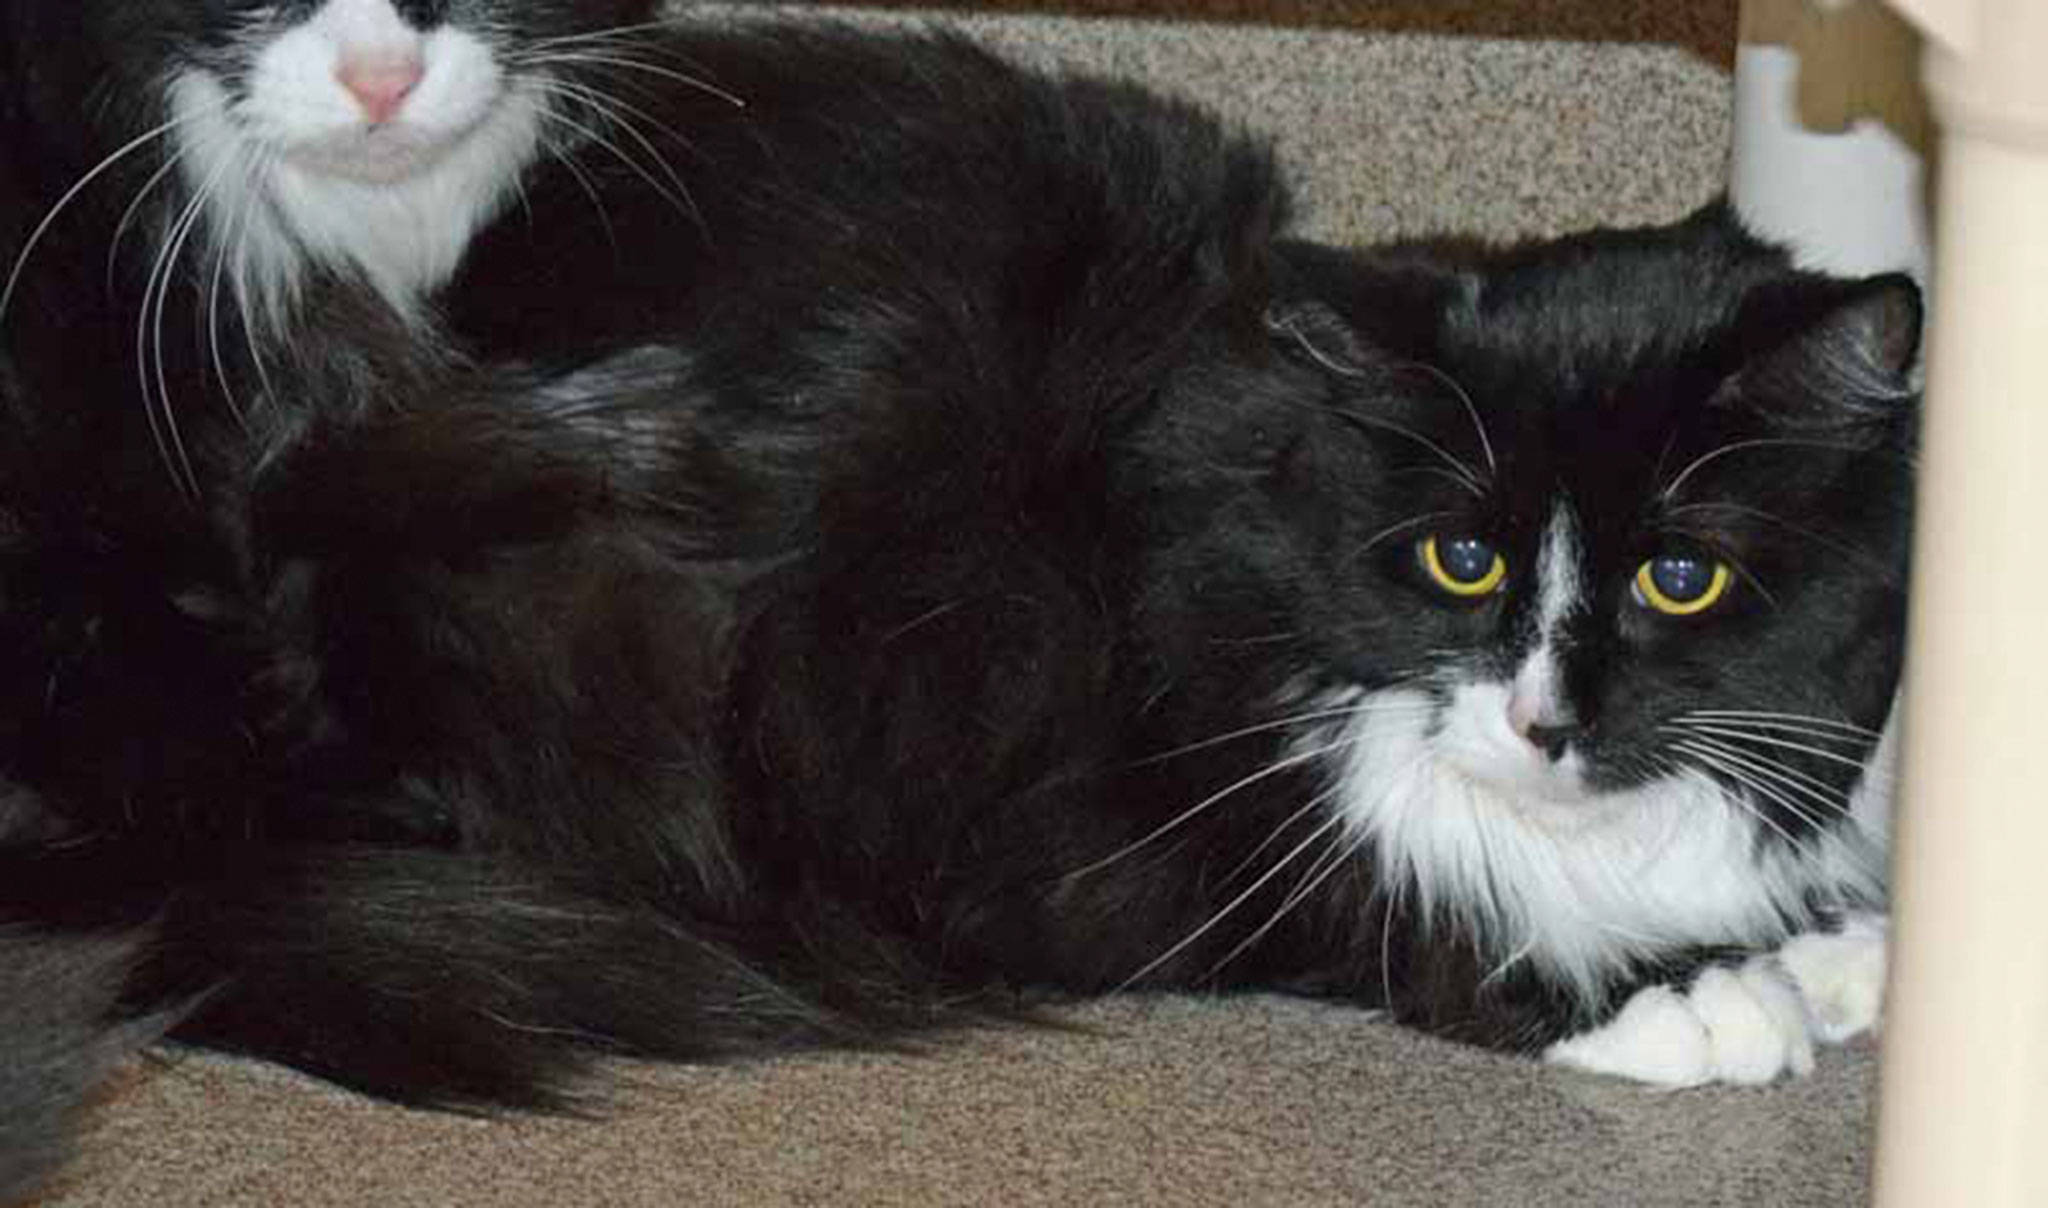 5 year old Angel has lived in a quiet home. She can be scared of fast movements and noises, because of this we are looking for a quiet home for her. Daily brushing will keep her coat glossy and mat free. (Arleigh Movitz/Everett Animal Shelter)